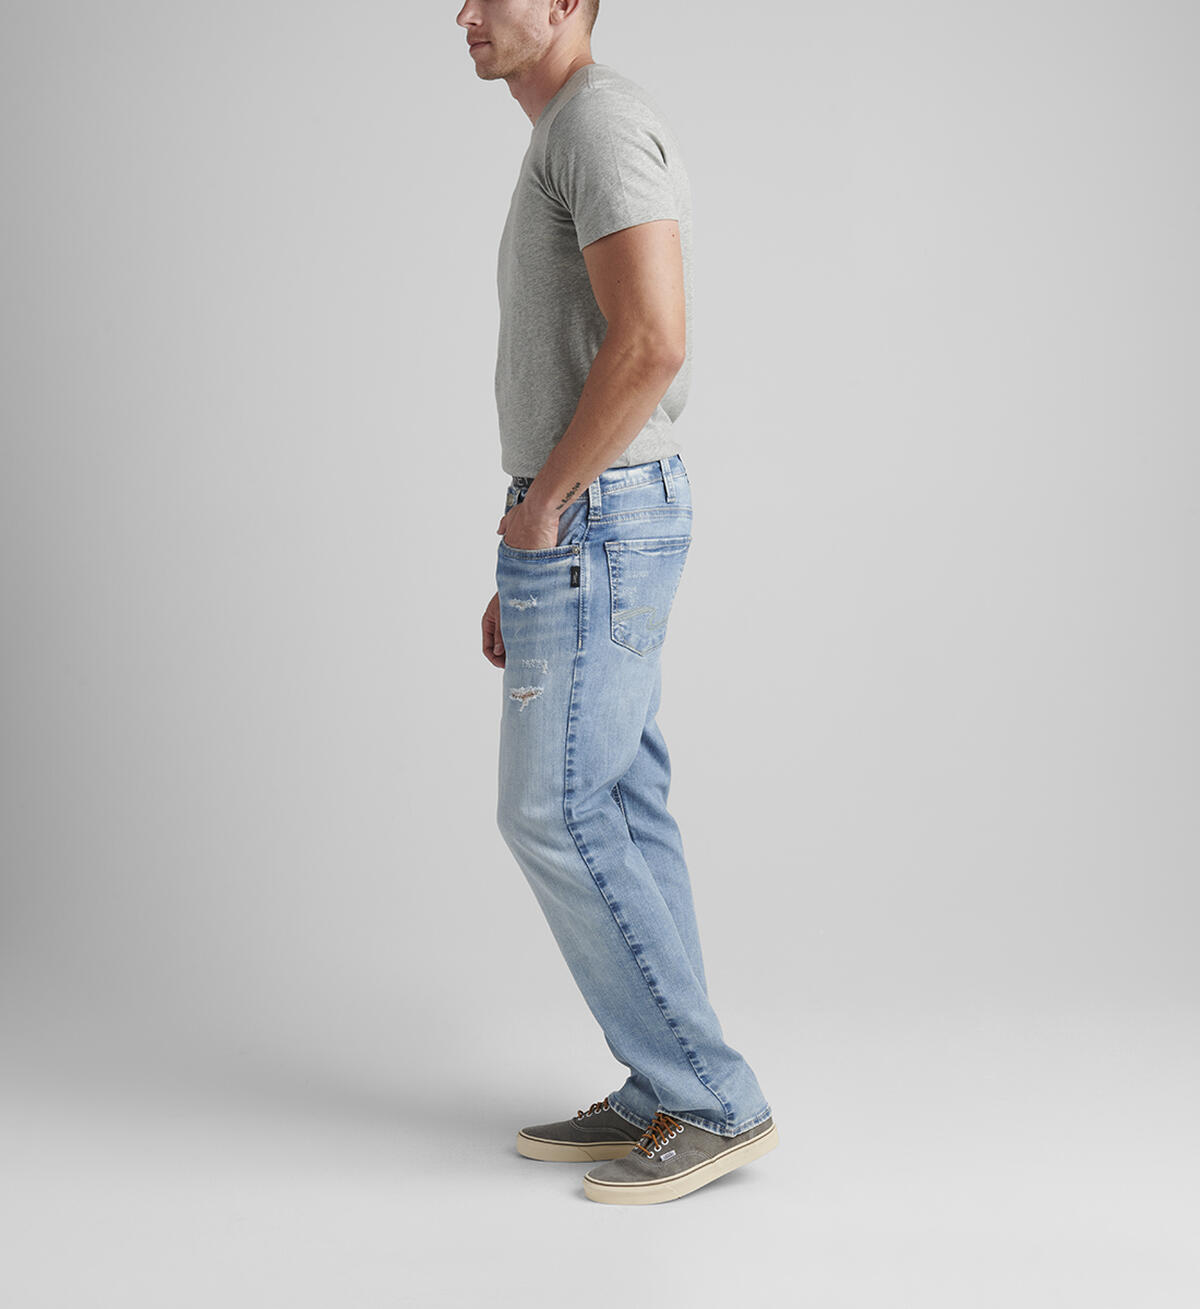 Allan Classic Fit Straight Leg Jeans, , hi-res image number 2